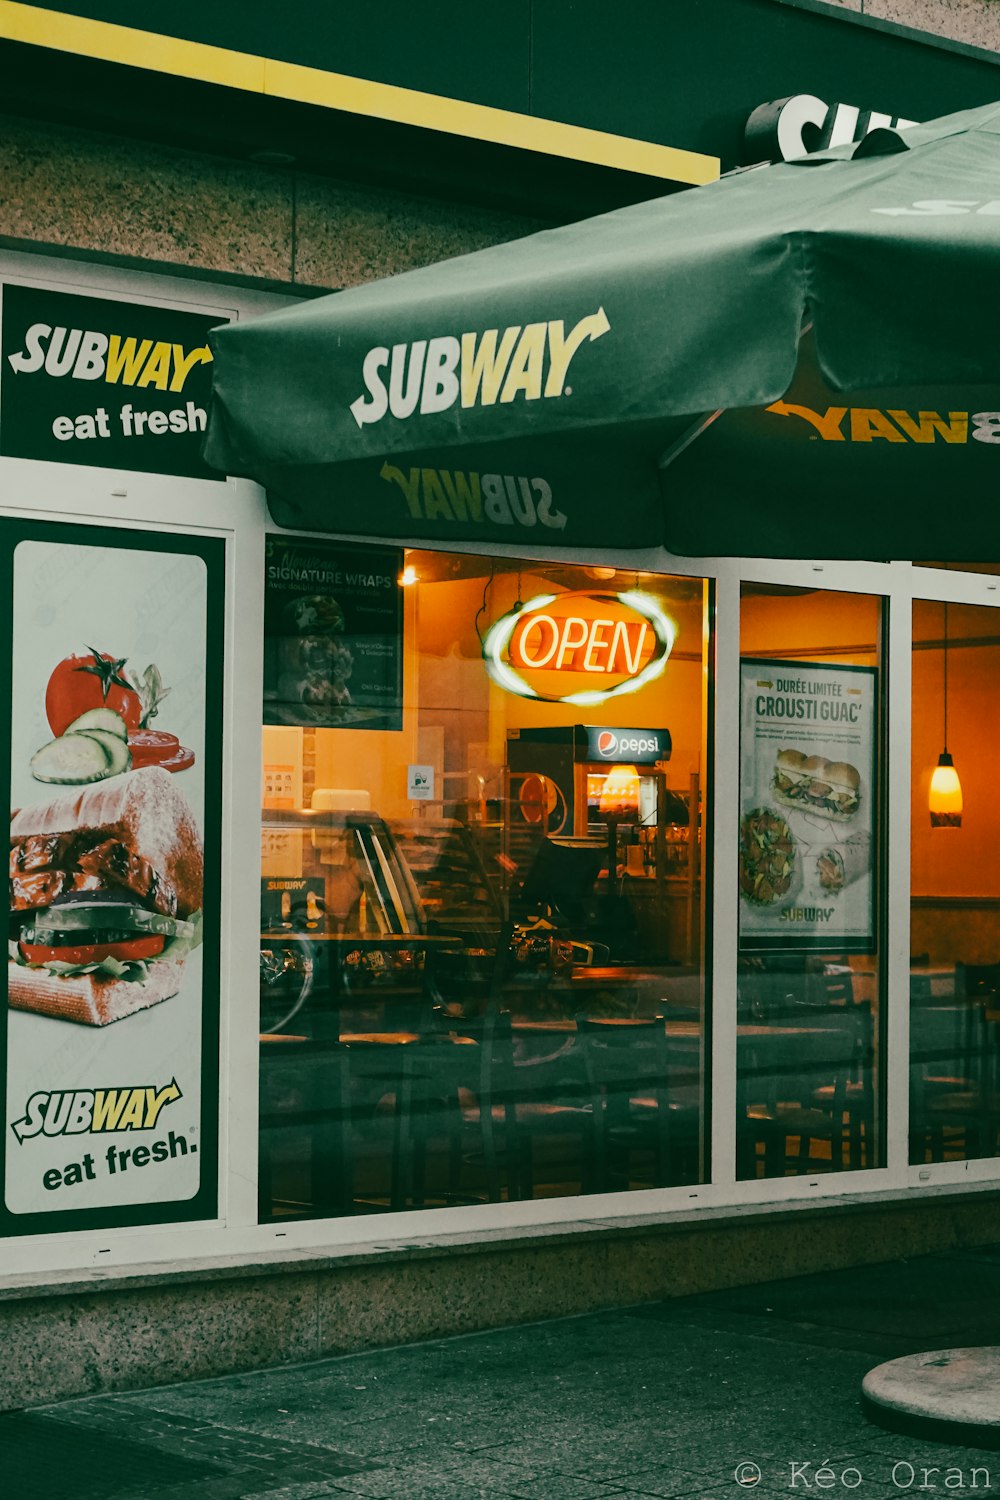 a subway restaurant with a green awning